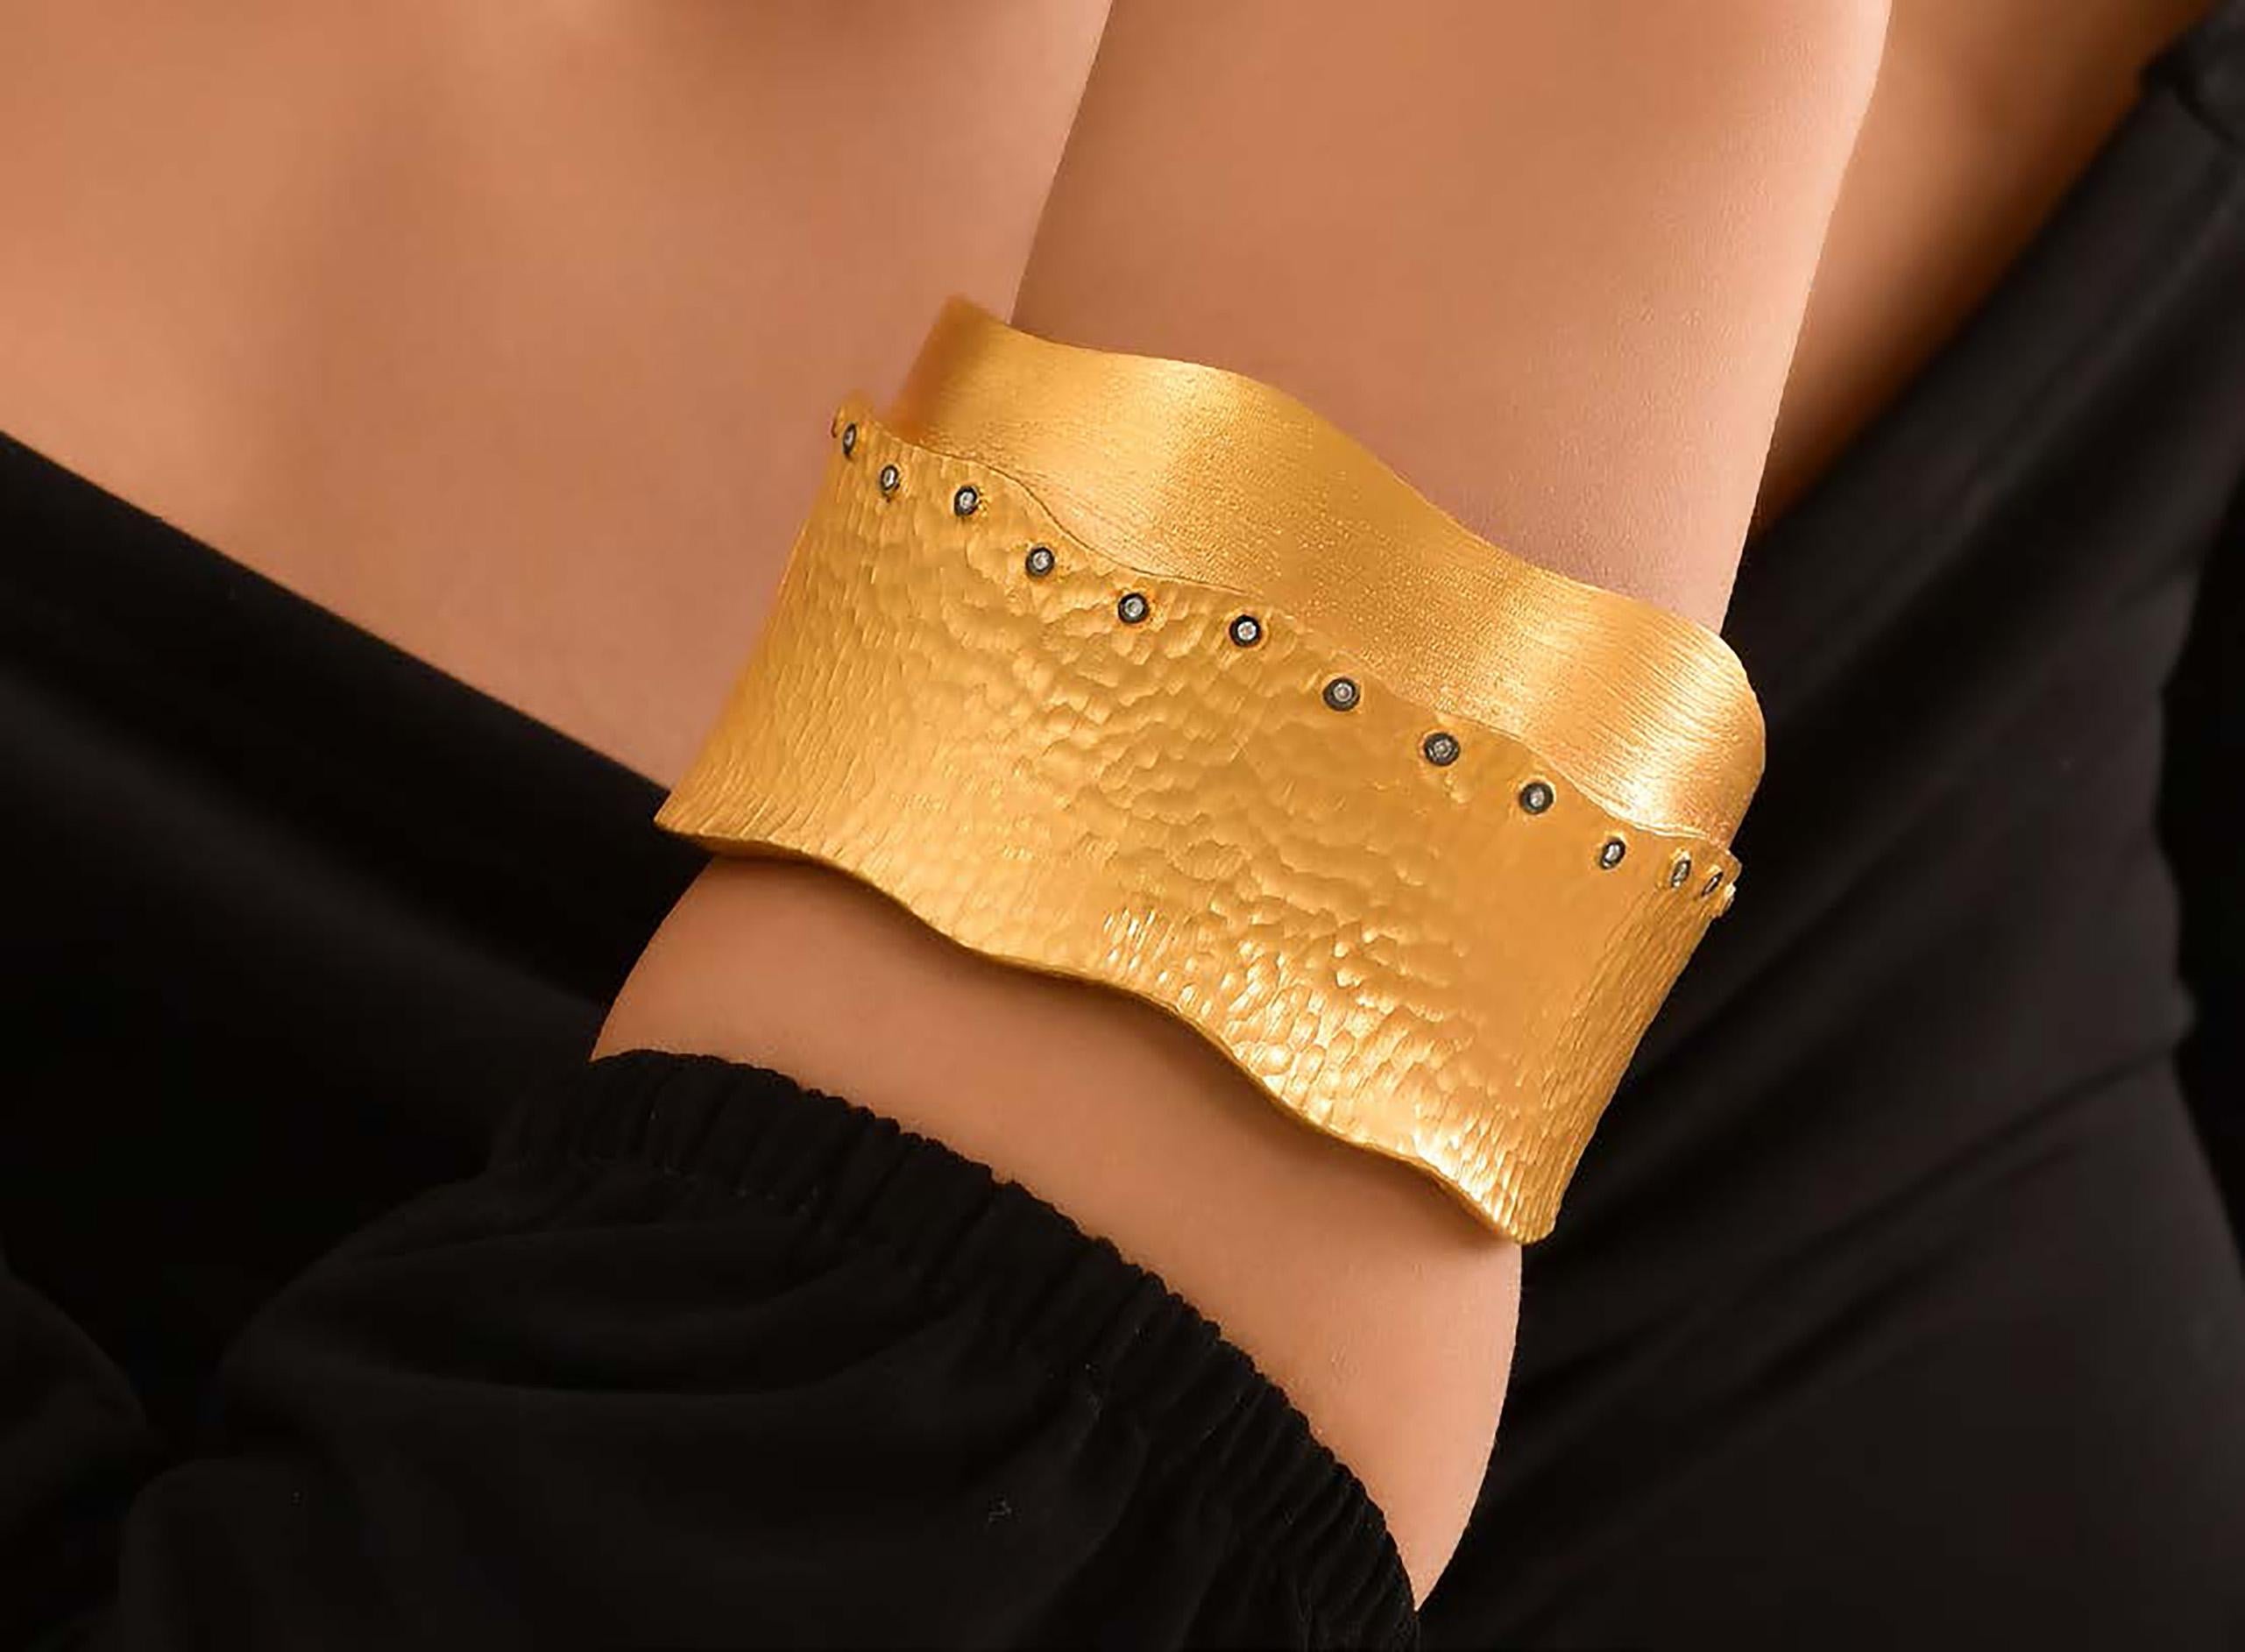 24K Gold Hinge Bangle Bracelet with Diamonds by Kurtulan. Cuff approximately 3 inches wide. Size Small-Medium
This piece is made to order and will take approximately 4-6 weeks for delivery.

ABOUT KURTULAN JEWELLERY OF INSTANBUL, TURKEY:
Kurtulan